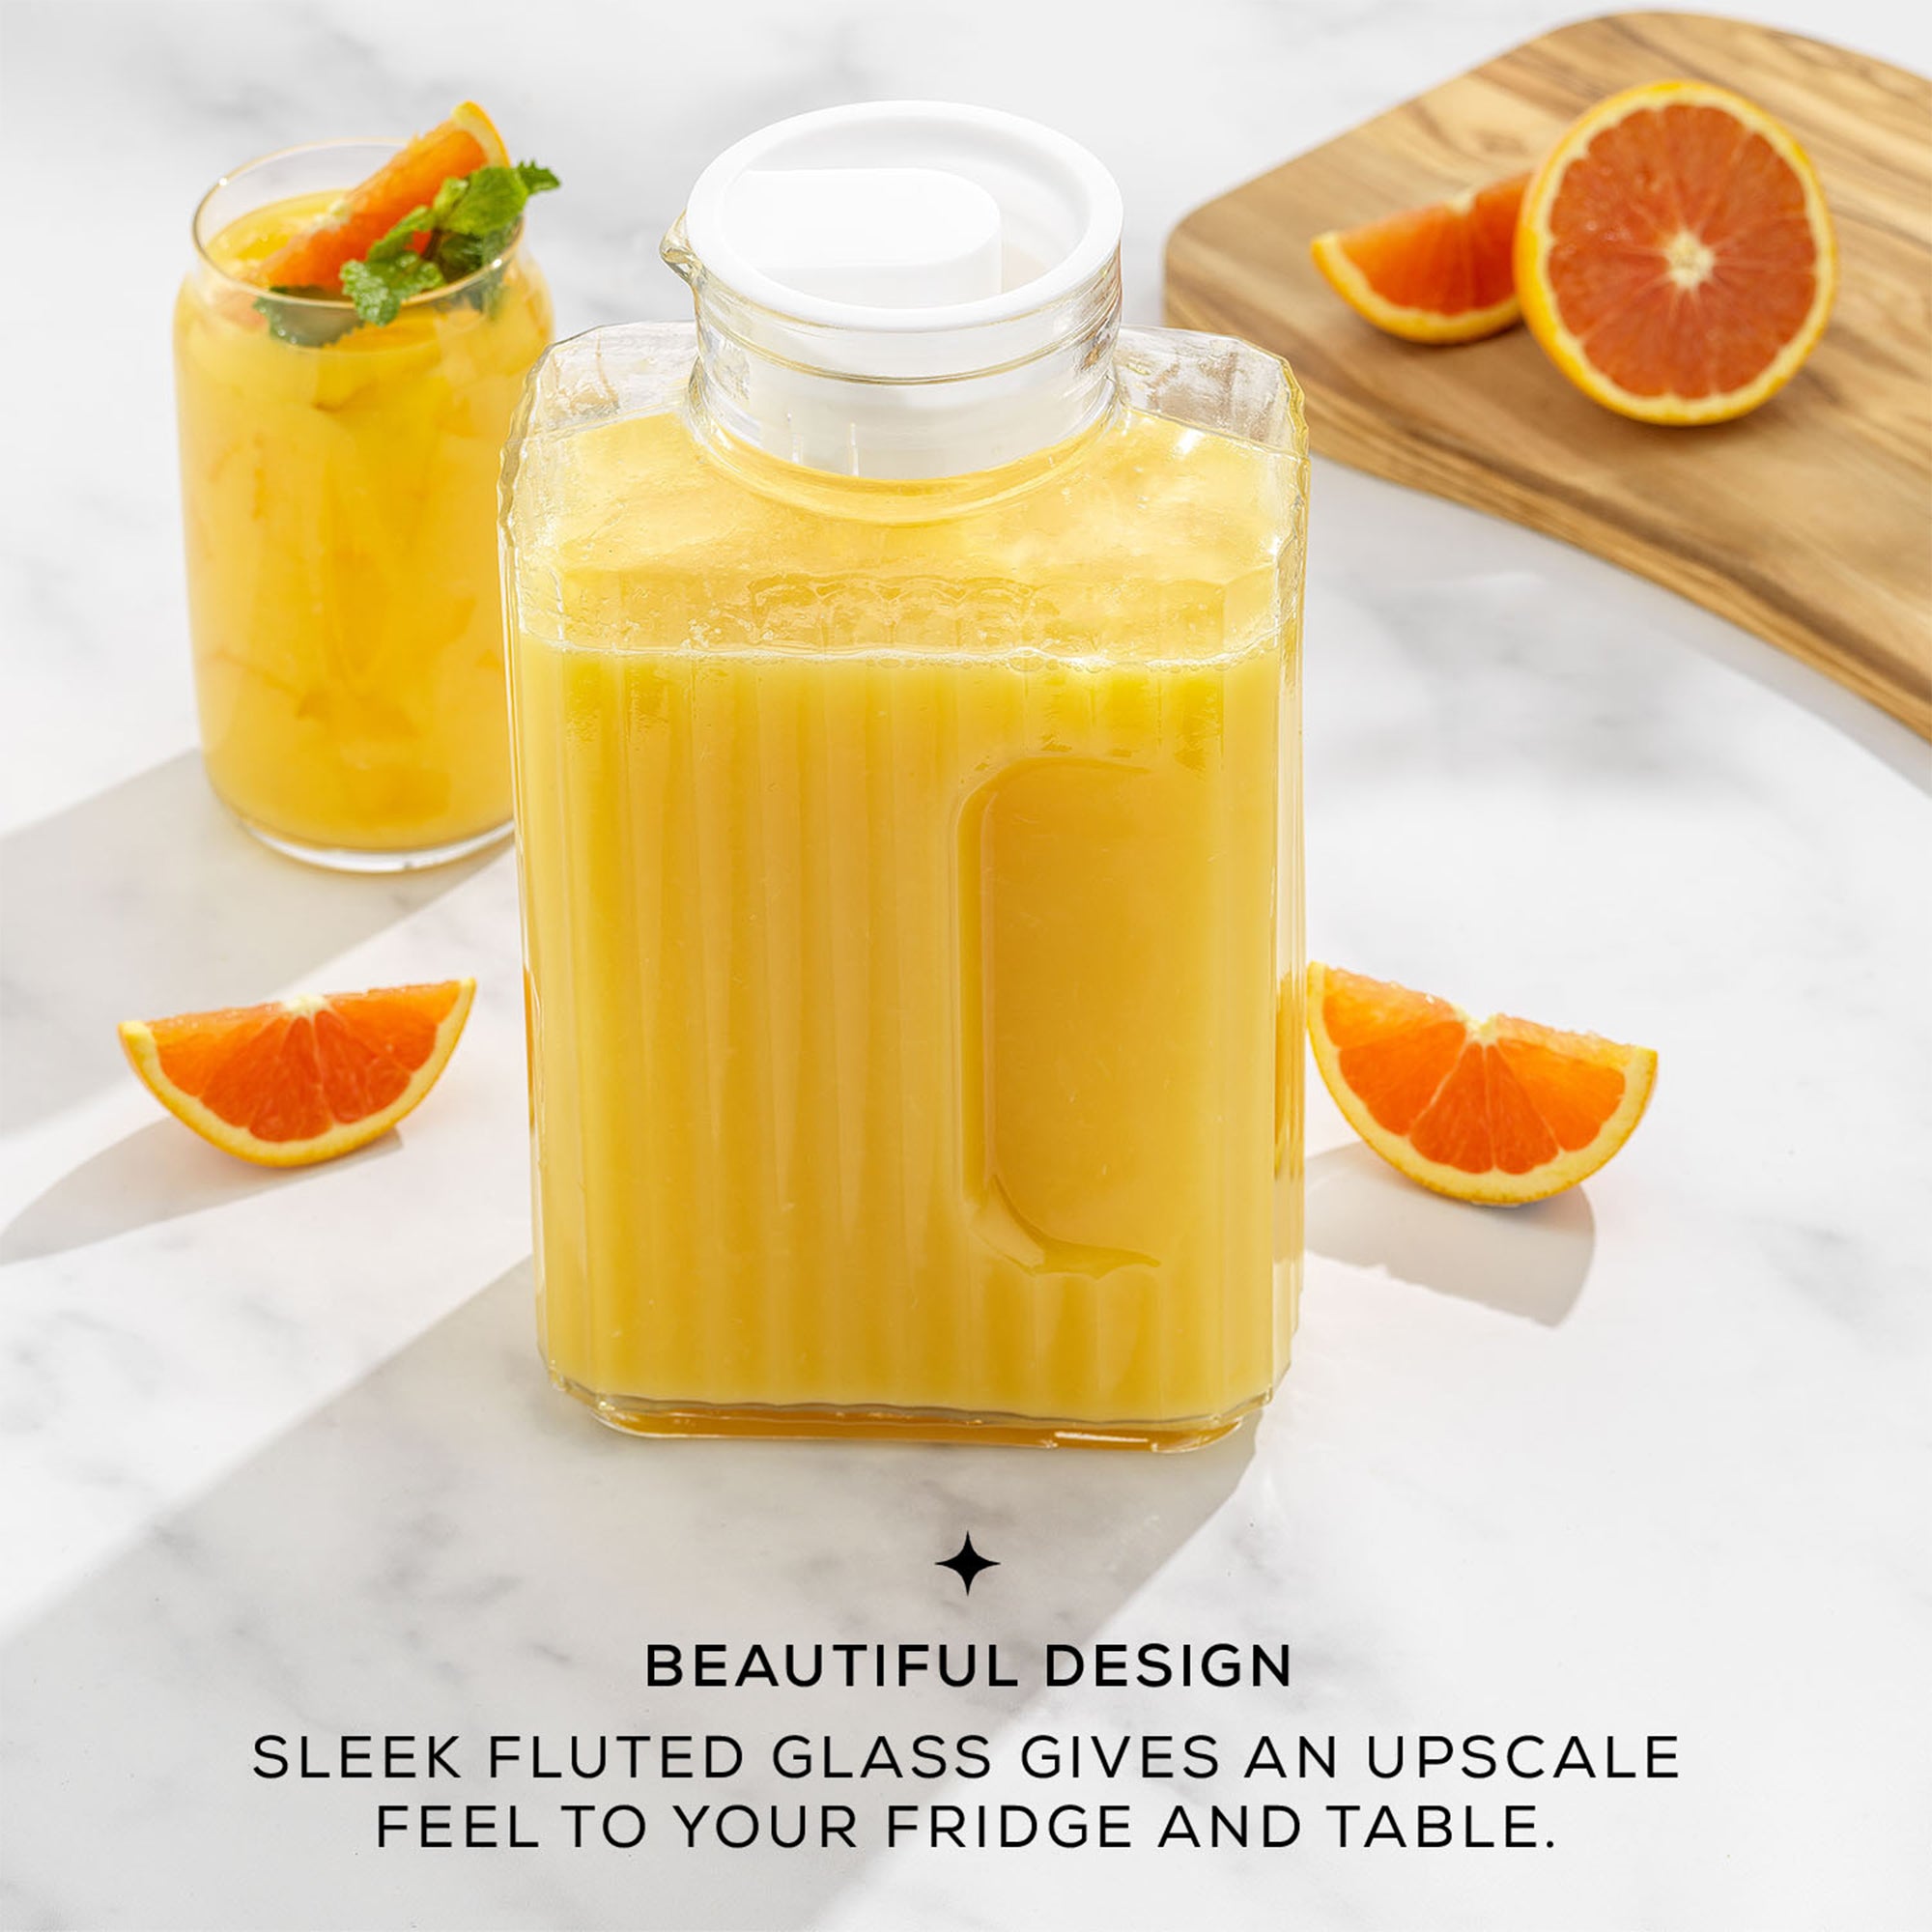 A JoyJolt Beverage Serveware Glass Pitcher filled with orange juice sits on a table next to a cluster of oranges. The 2-liter pitcher has a sleek fluted design. Text on the image reads: "SLEEK FLUTED GLASS GIVES AN UPSCALE BEAUTIFUL DESIGN FEEL TO YOUR FRIDGE AND TABLE."